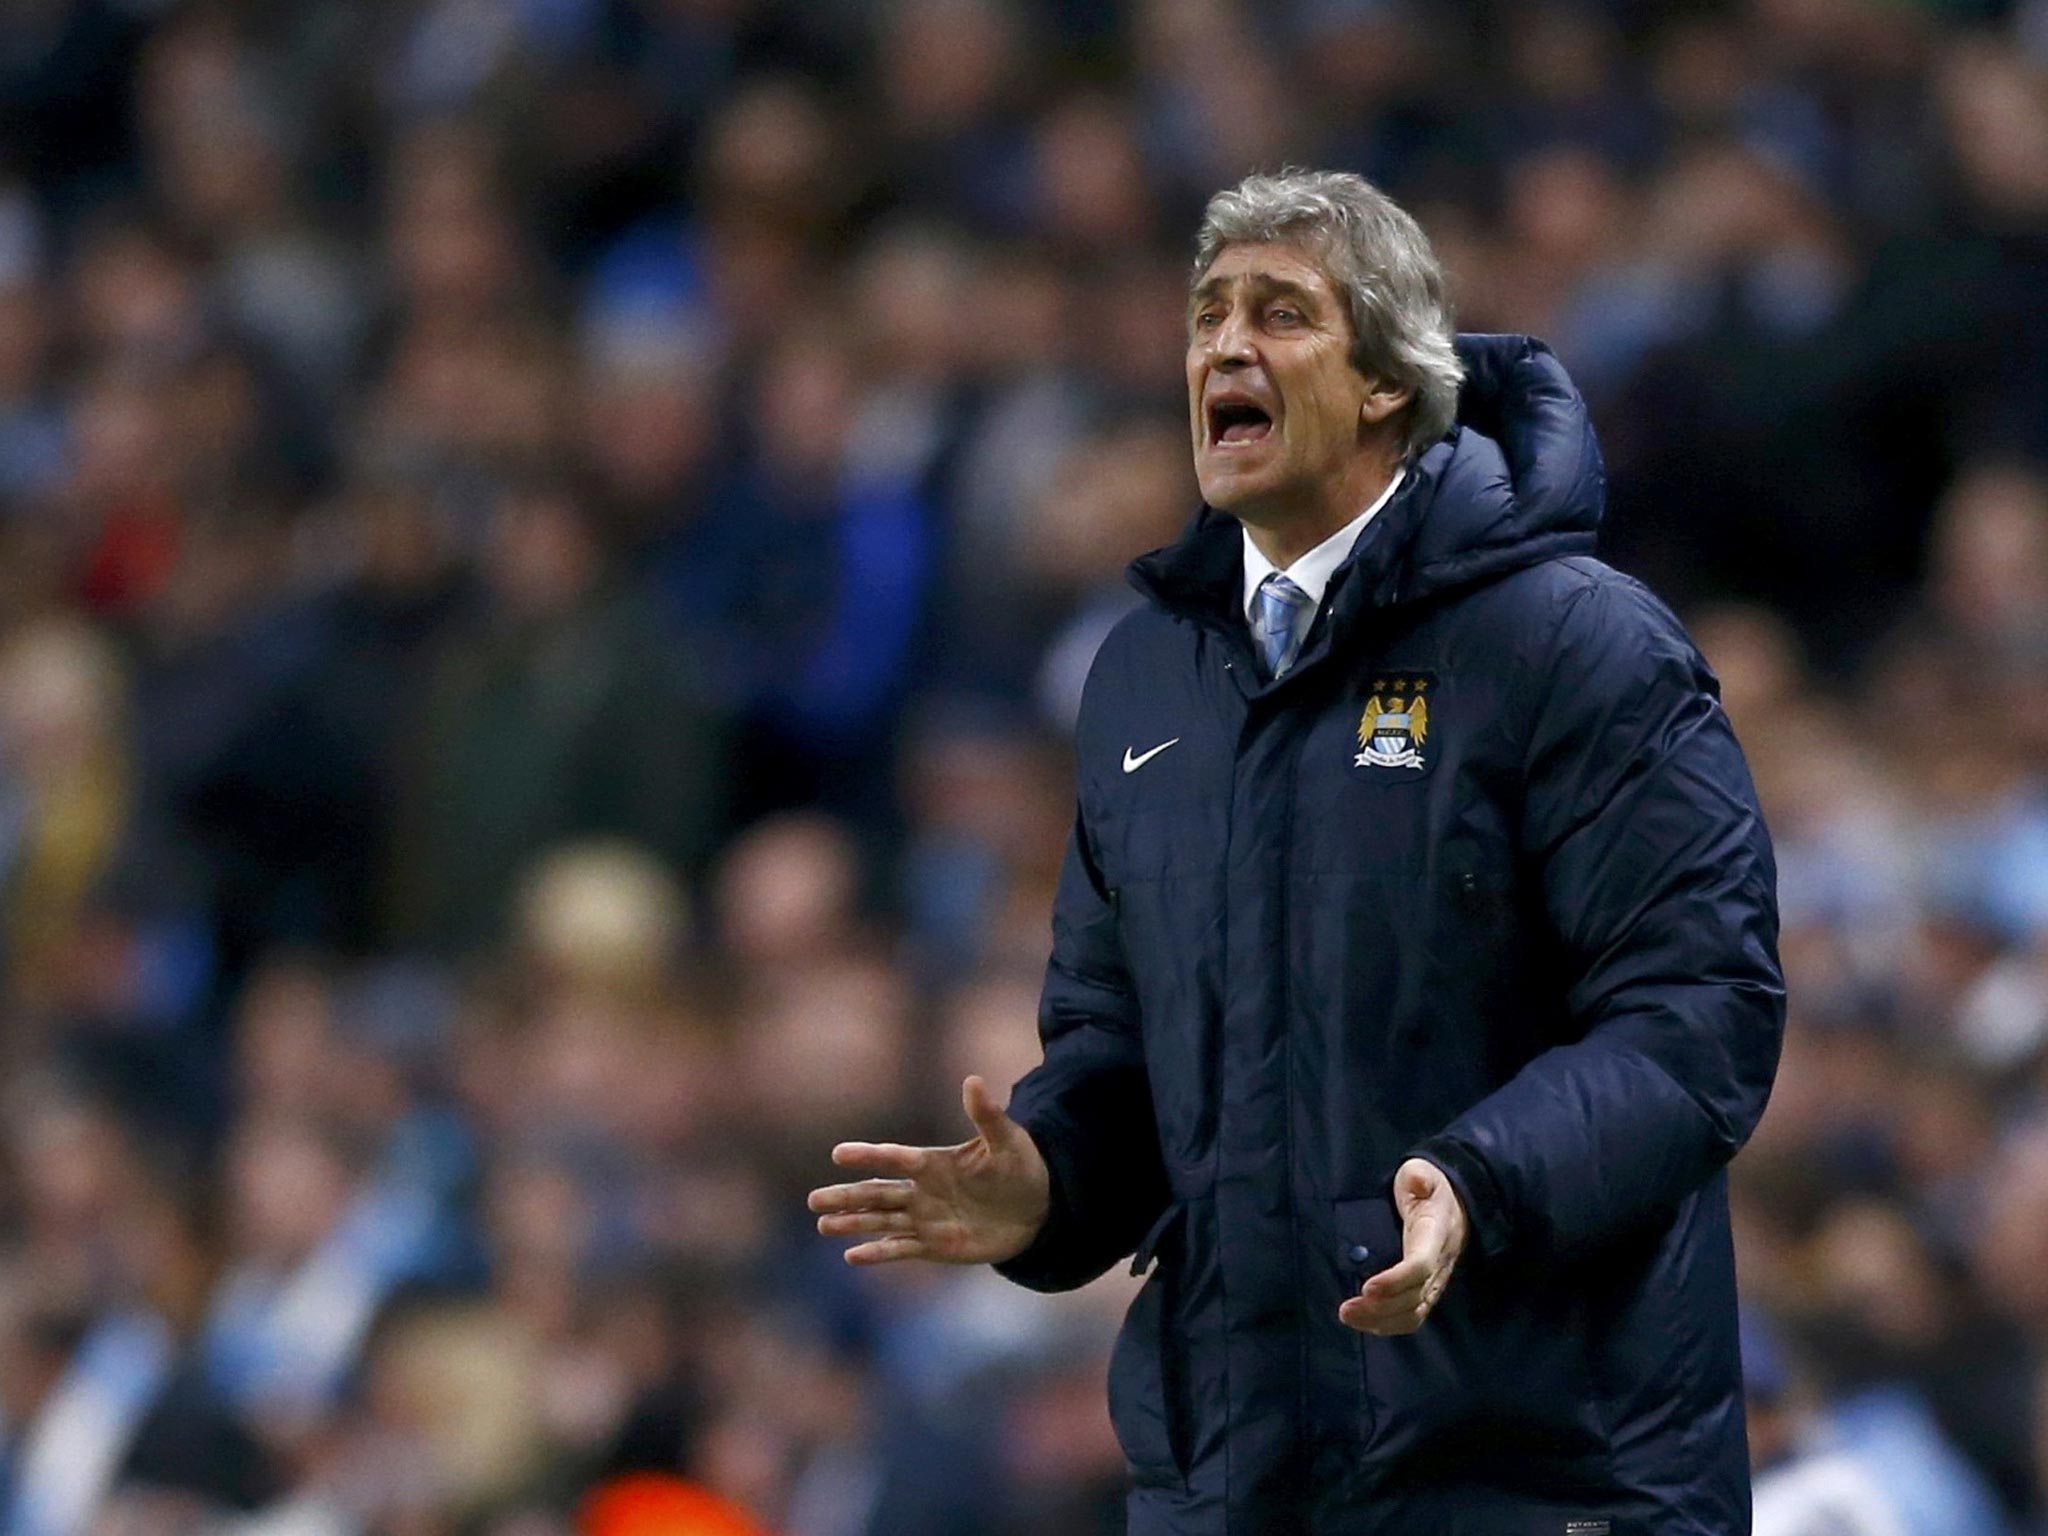 Manuel Pellegrini said Jonas Eriksson should not have been referee on Tuesday because he was Swedish